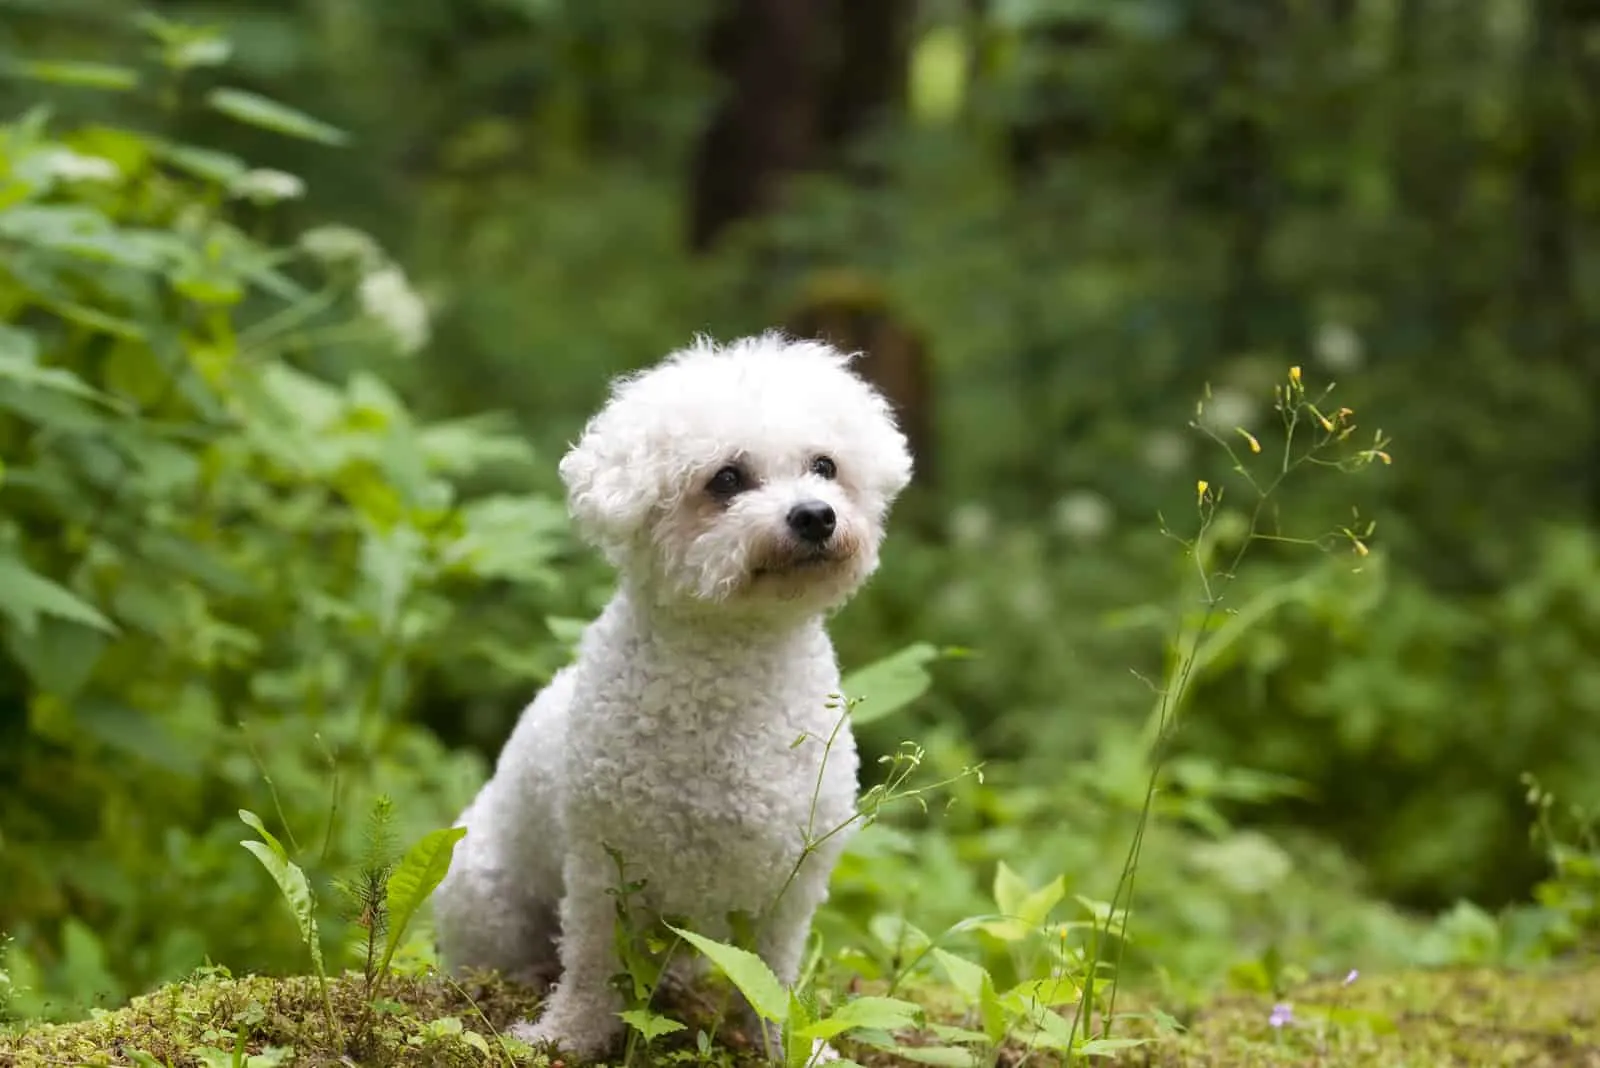 Bichon Frise female with beautiful expression